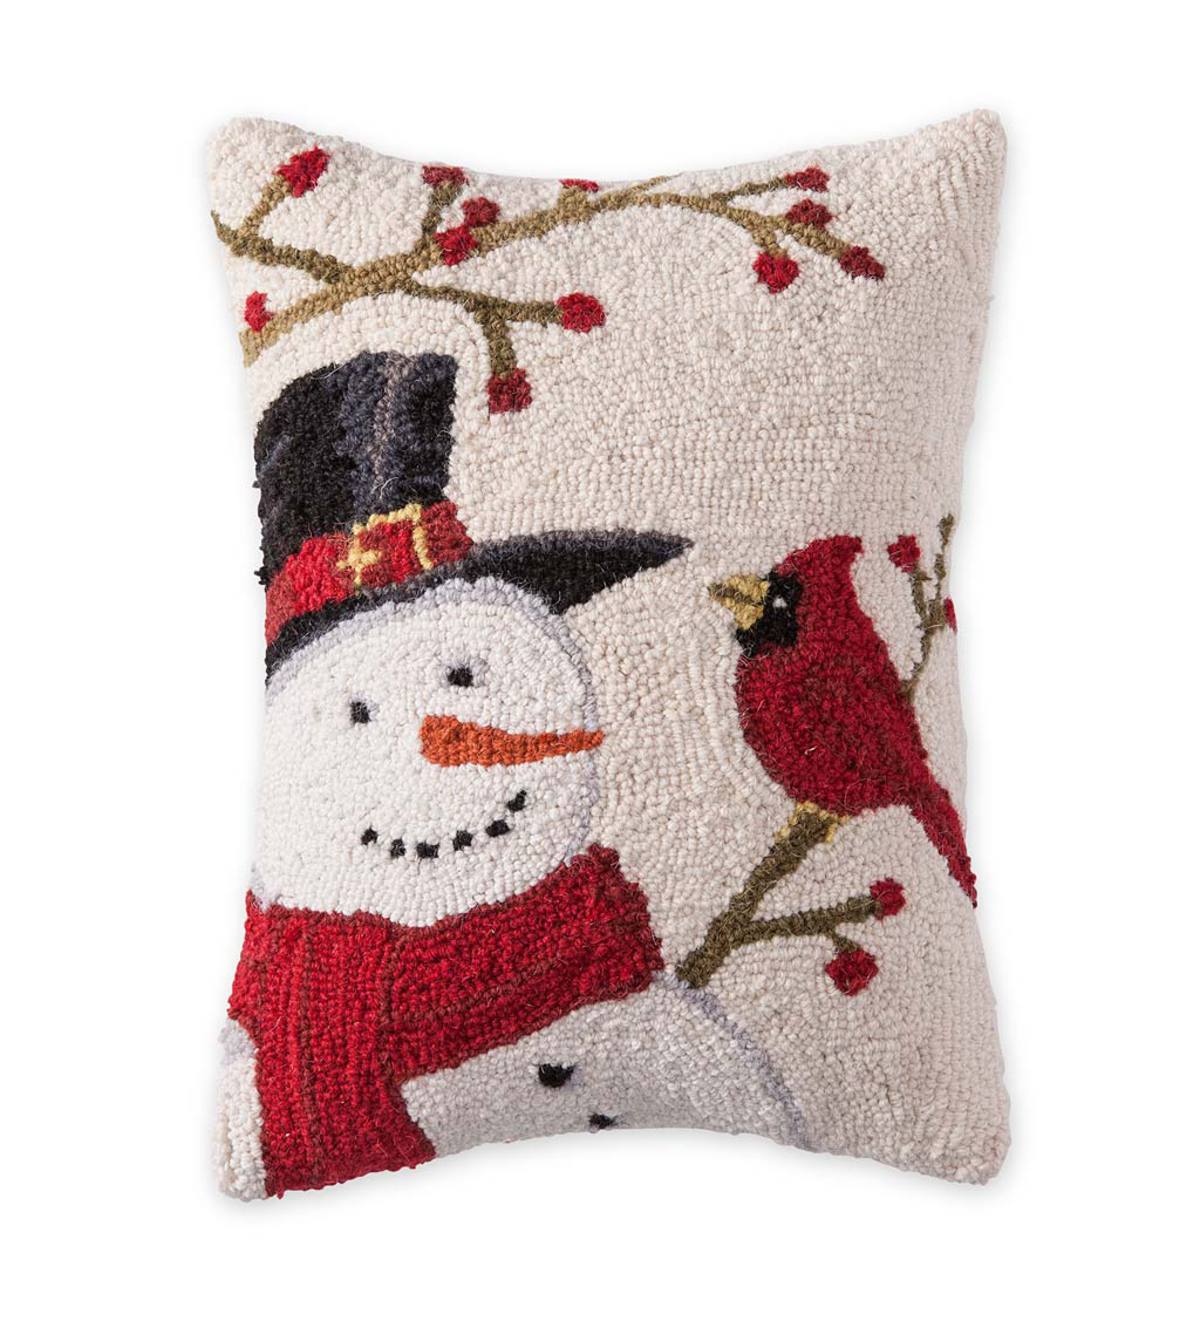 Snowman and Cardinal Hooked Wool Pillow